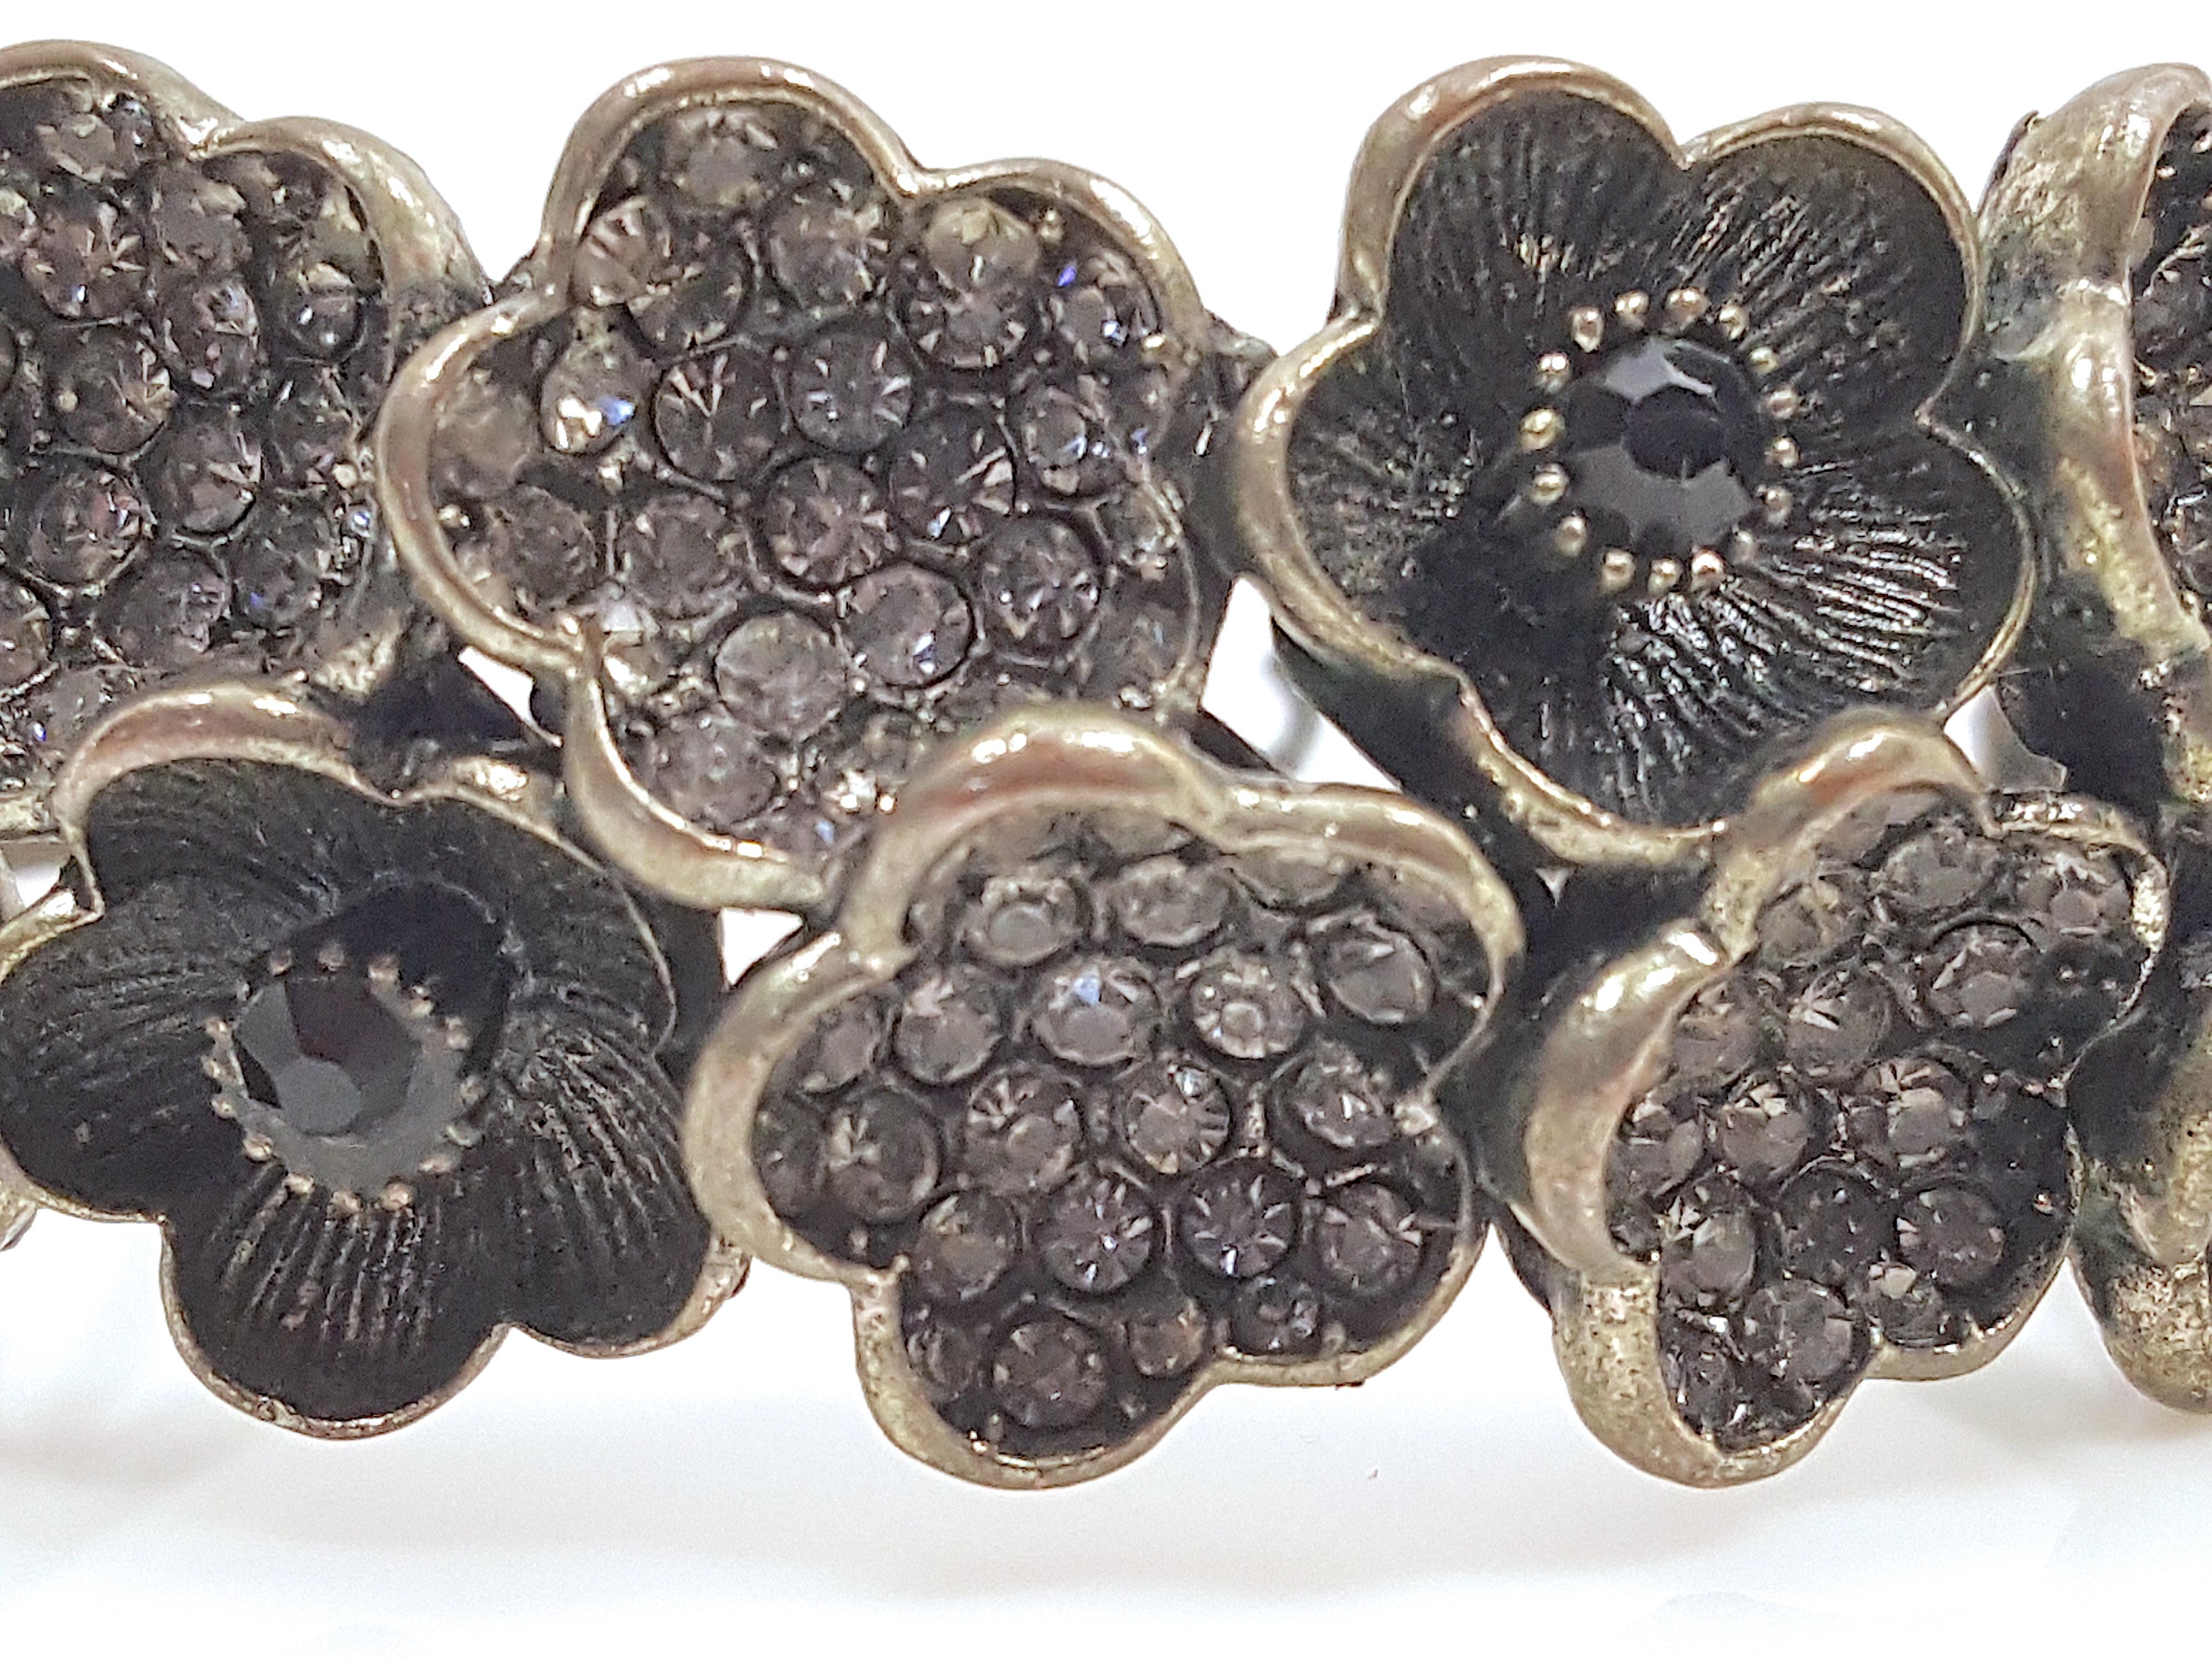 With the mid-century hallmarks of handcrafted costume jewelry by New-York-City-based Hargo Creations but without the post-copyright signature (HAR), this early clamper cuff bracelet featuring stylized concave monochrome textural flowers by the